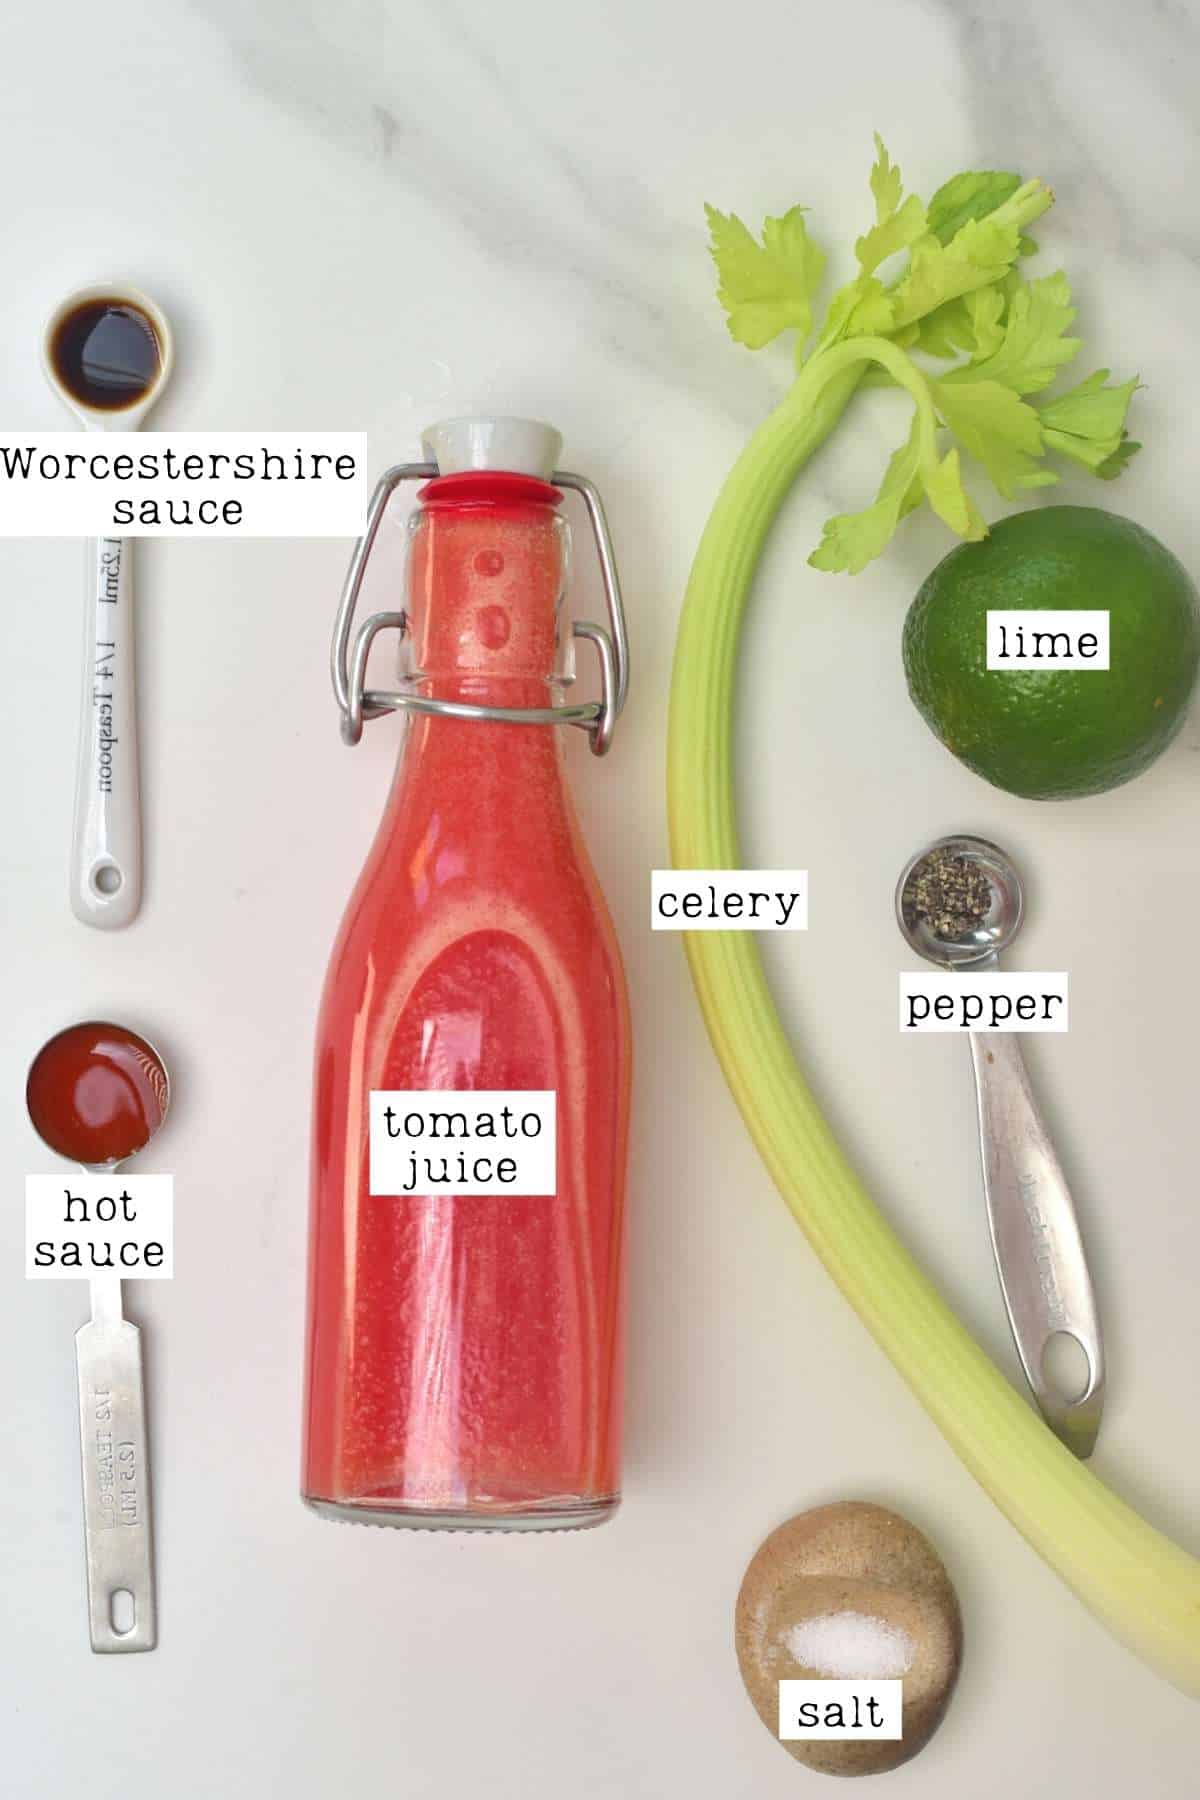 https://www.alphafoodie.com/wp-content/uploads/2021/05/Bloody-Mary-Bloody-Mary-Ingredients.jpg